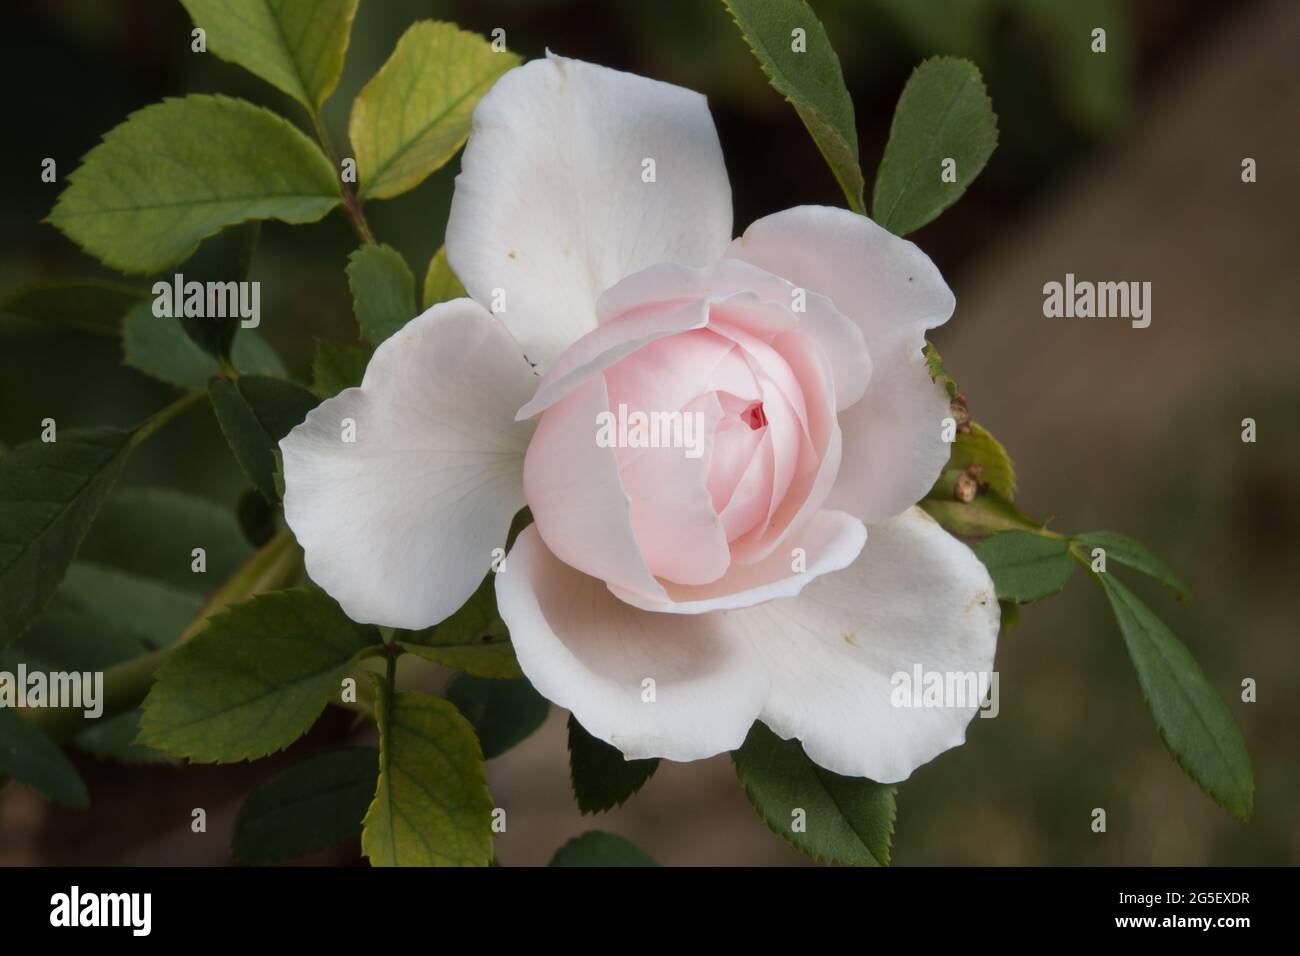 Single rose in bloom in garden. Photographed in Nuriootpa, South Australia. Stock Photo